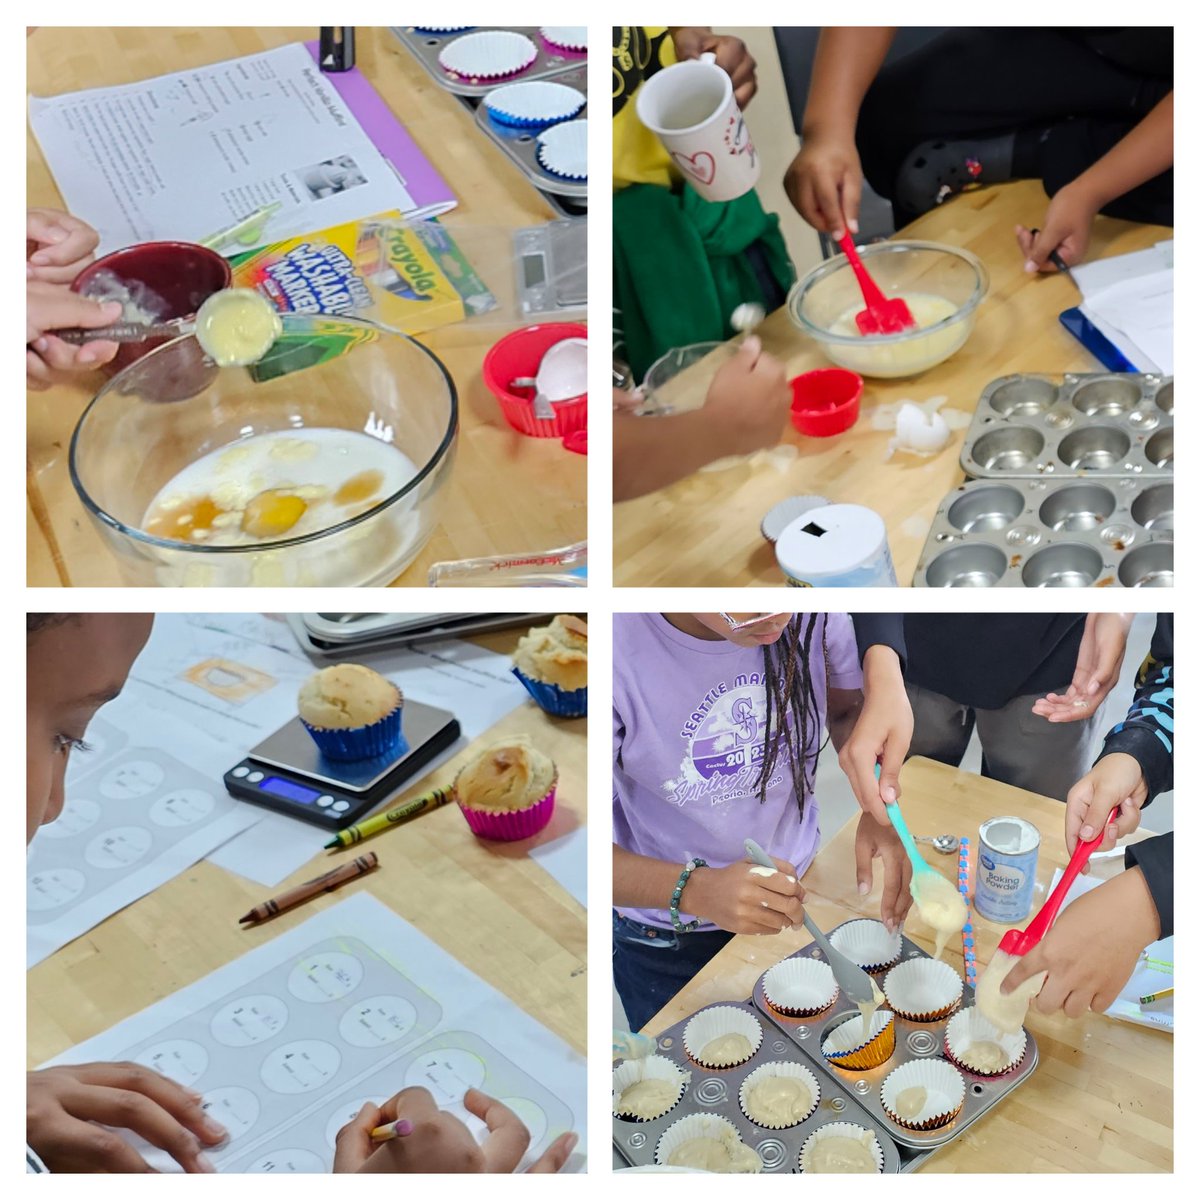 5th graders @SartoriSTEM started a conservation of matter unit this week! They halved fractions & measured ingredients to make 1/2 recipe. They weighed each muffin before & after baking. After baking, Muffins increased in volume but decreased in mass! How/why does that happen?